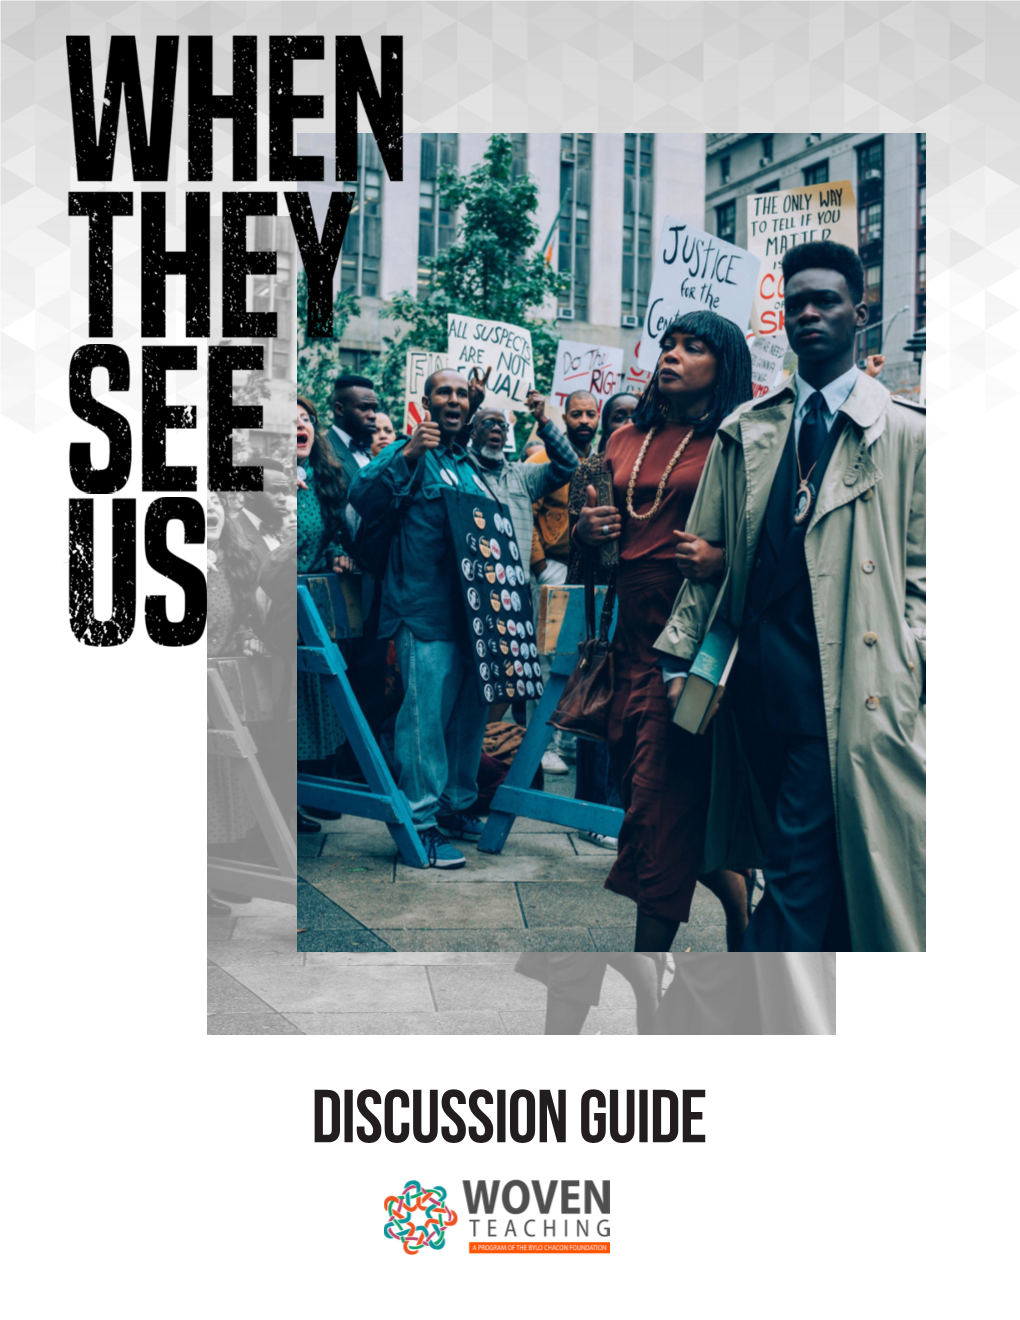 Discussion Guide for Ava Duvernay's When They See Us